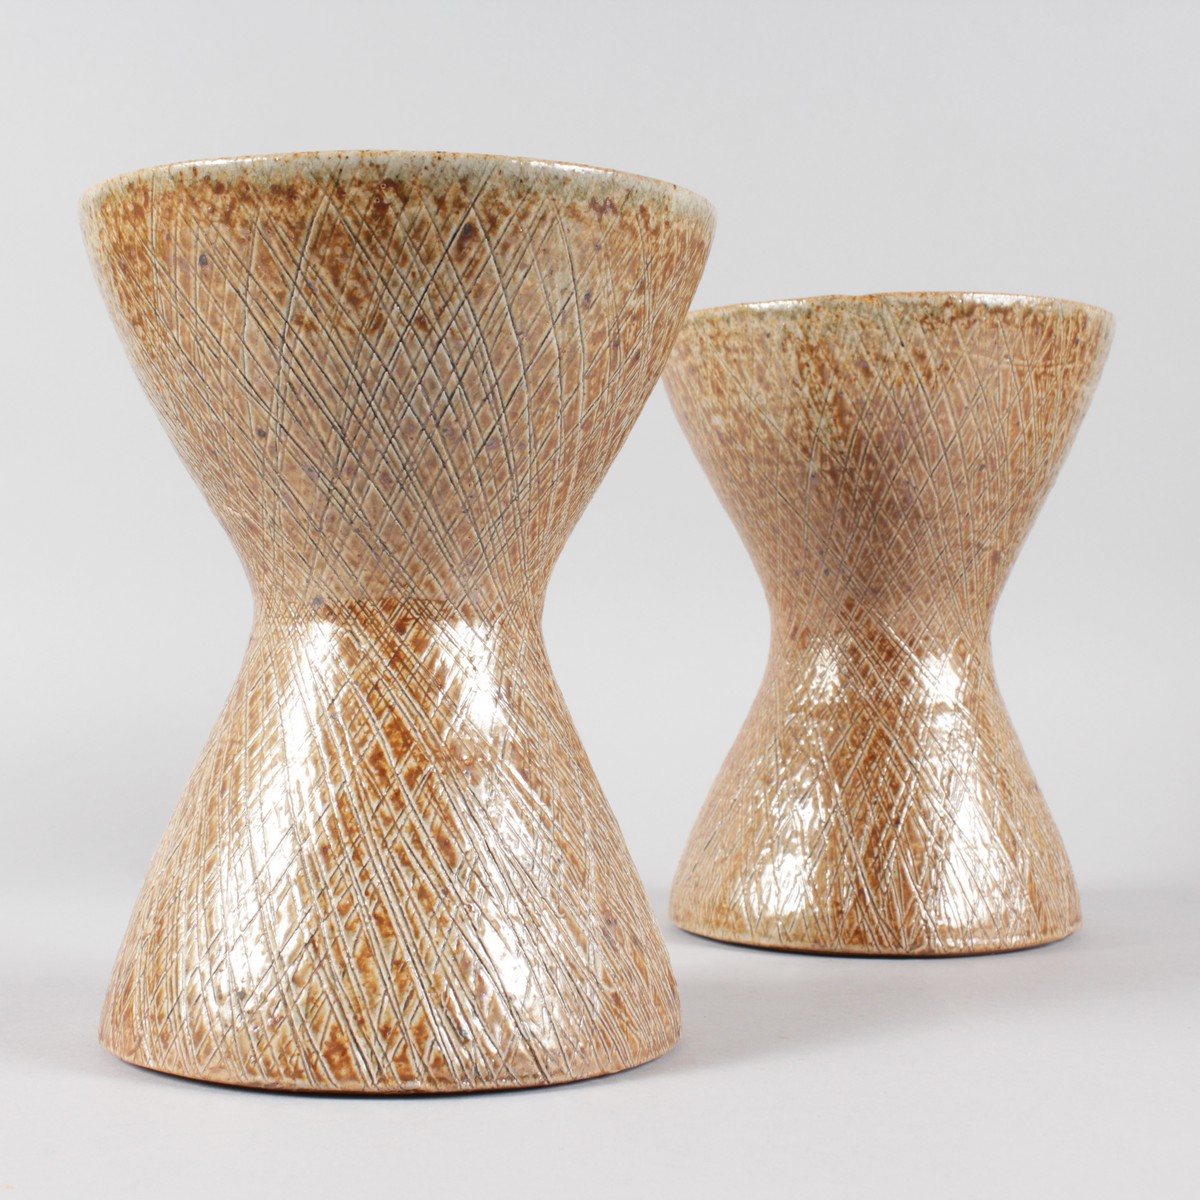 SARAH WATTS. A PAIR OF STONEWARE VASES. Impressed SW. 8ins high.